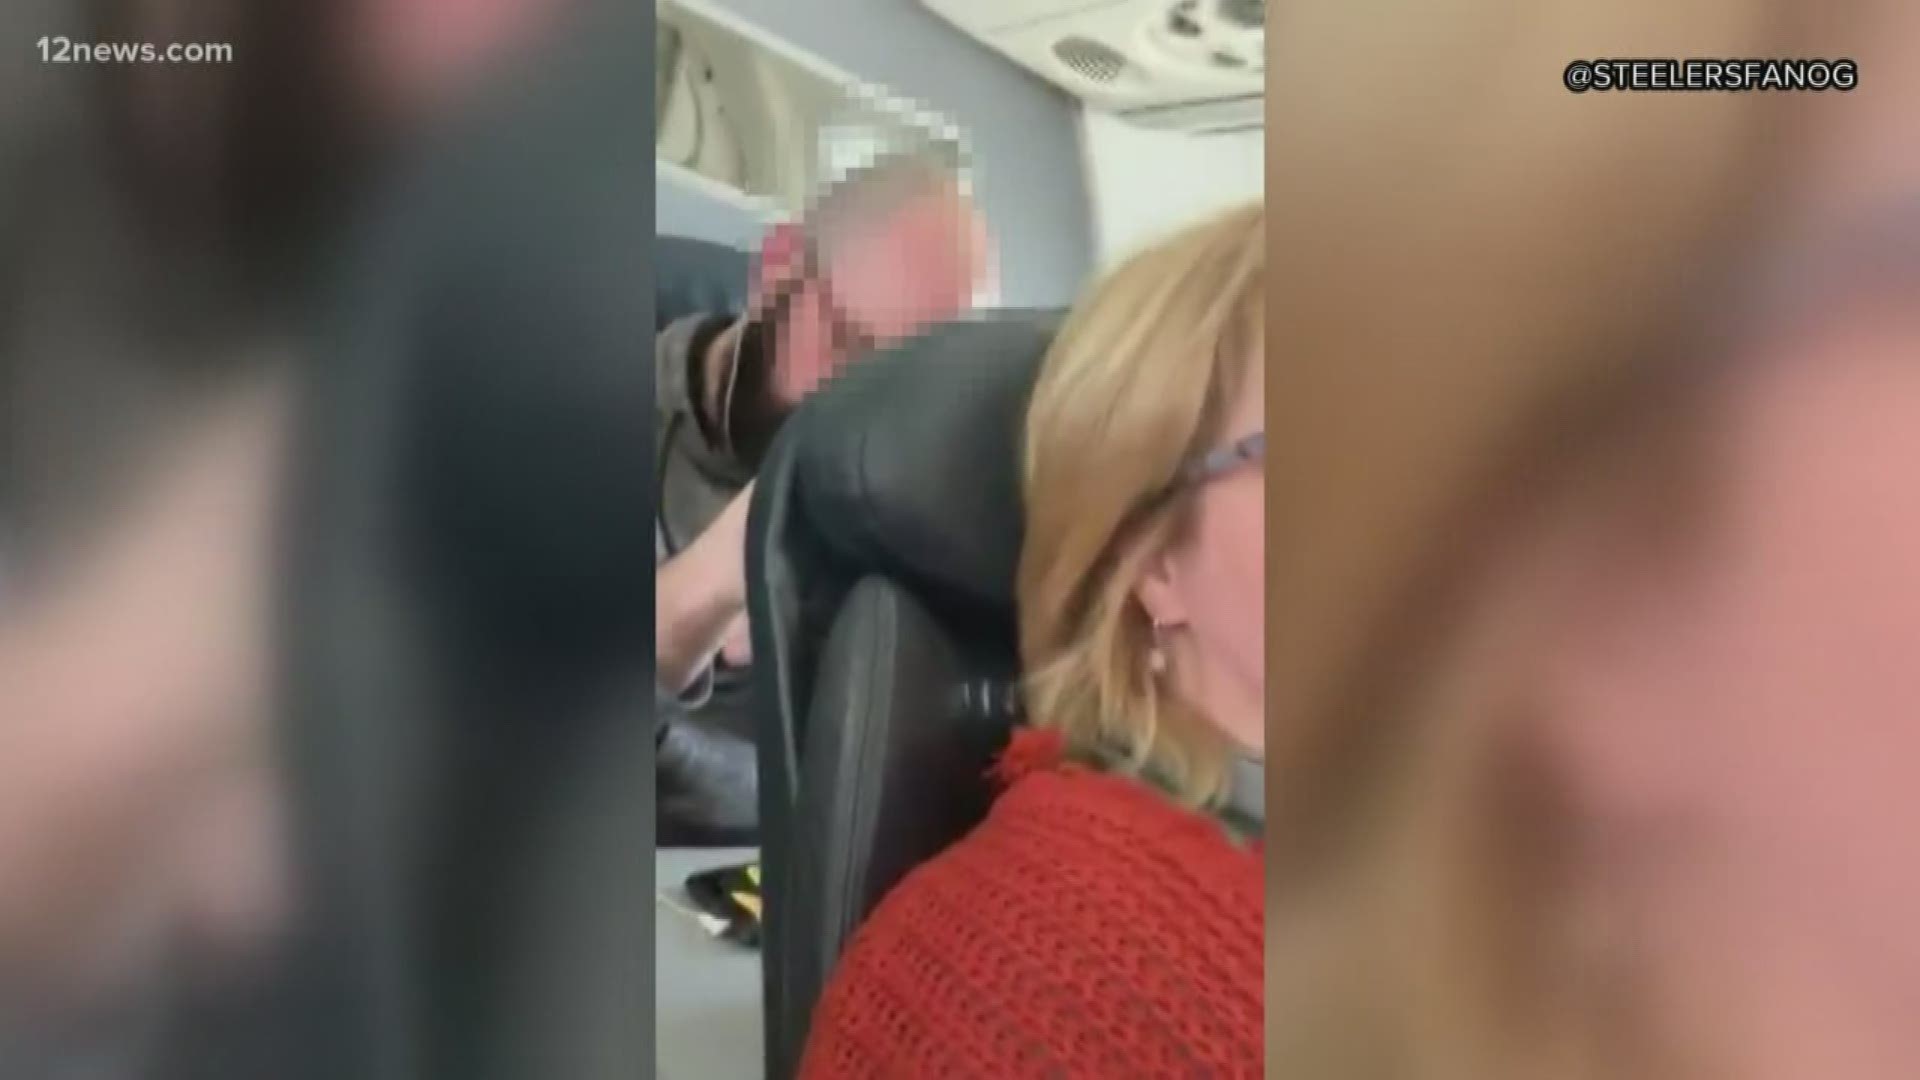 A video showing a man punching the back of a woman's reclined seat on an airplane has sparked debate over whether you should recline your seat.